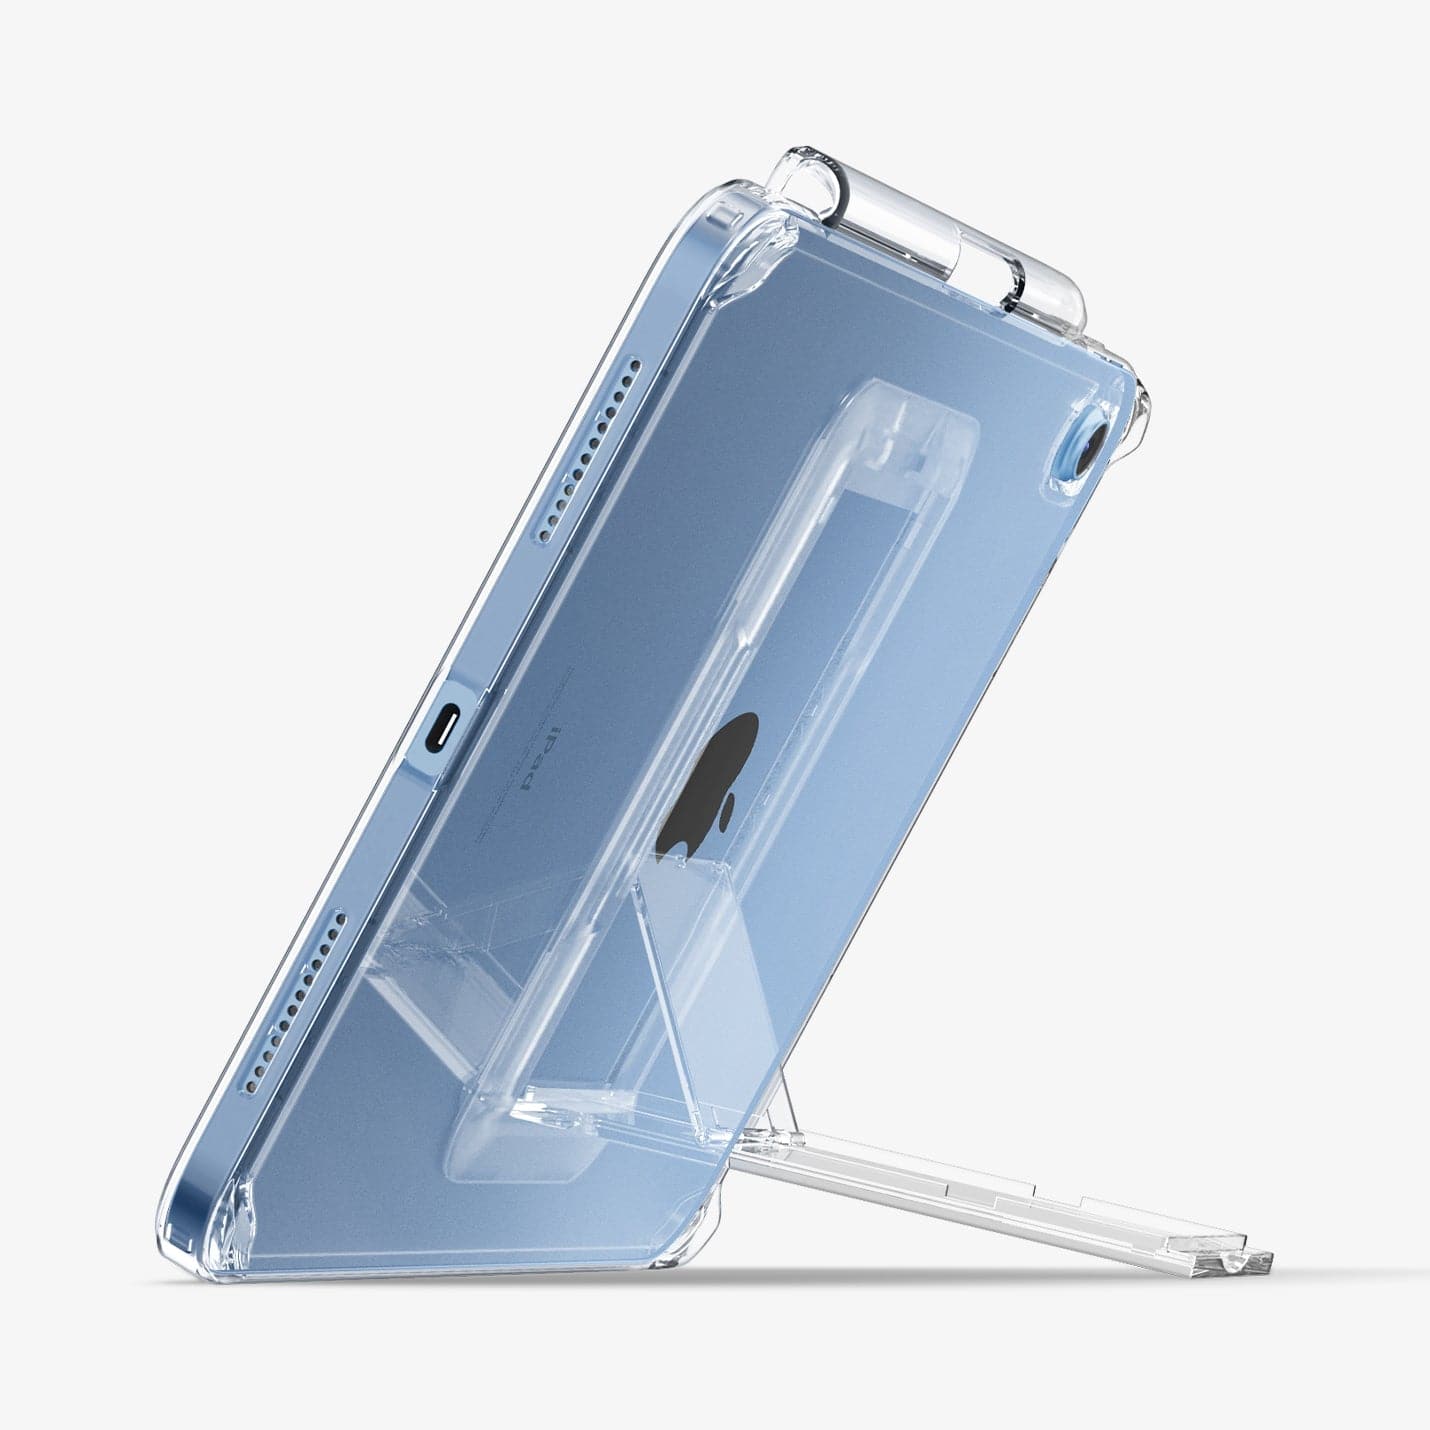 ACS05419 - iPad 10.9" Case Air Skin Hybrid S in crystal clear showing the back and bottom with device propped up by built in kickstand